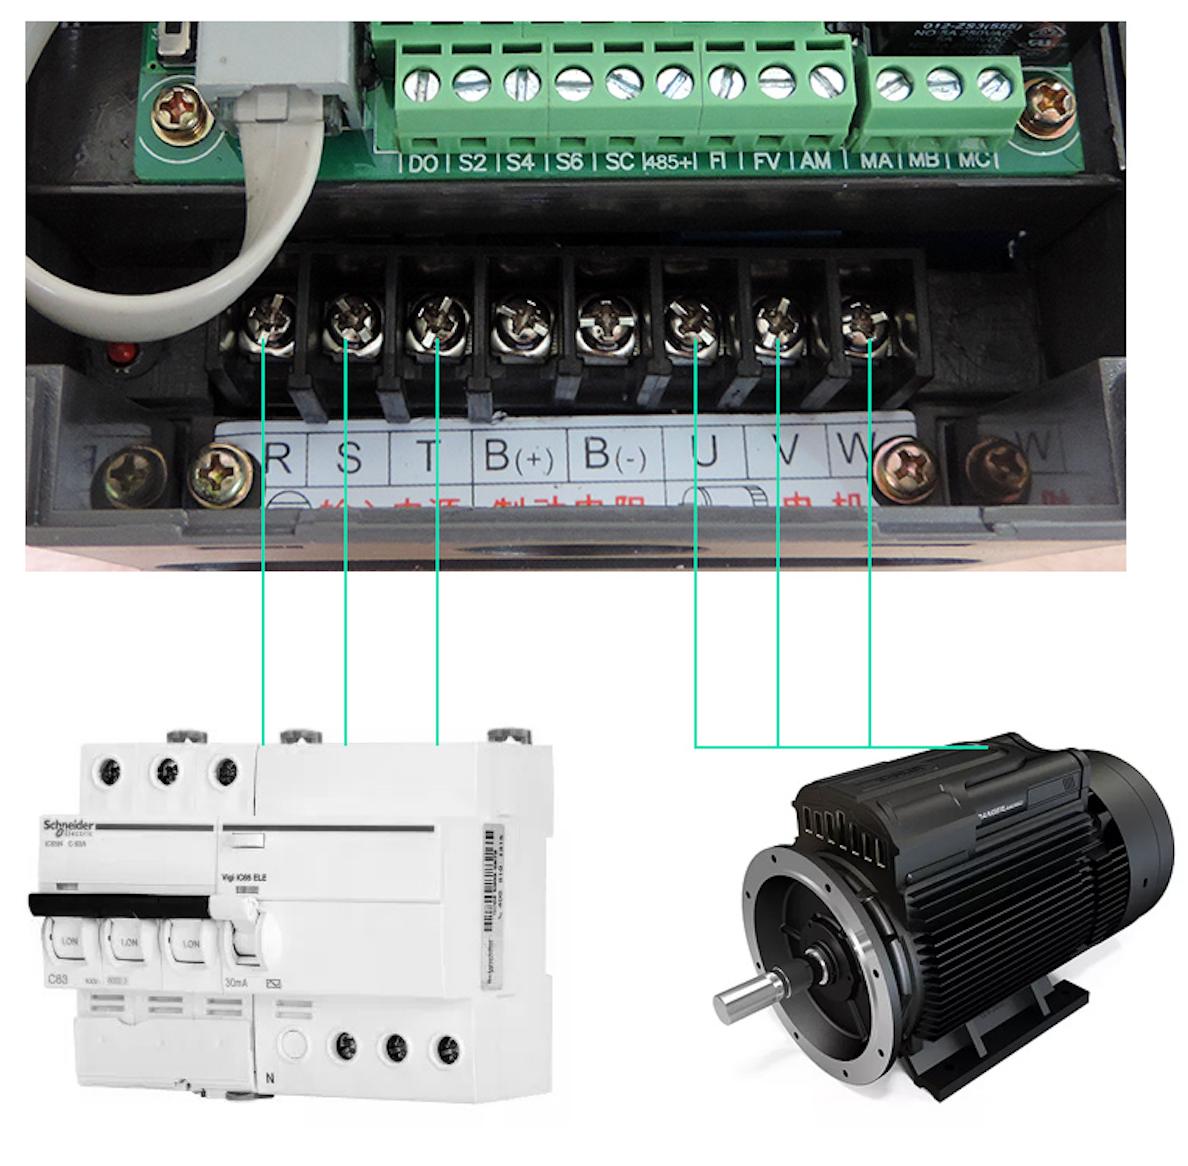 How to Select a Frequency Inverter that Best Matches the Load?